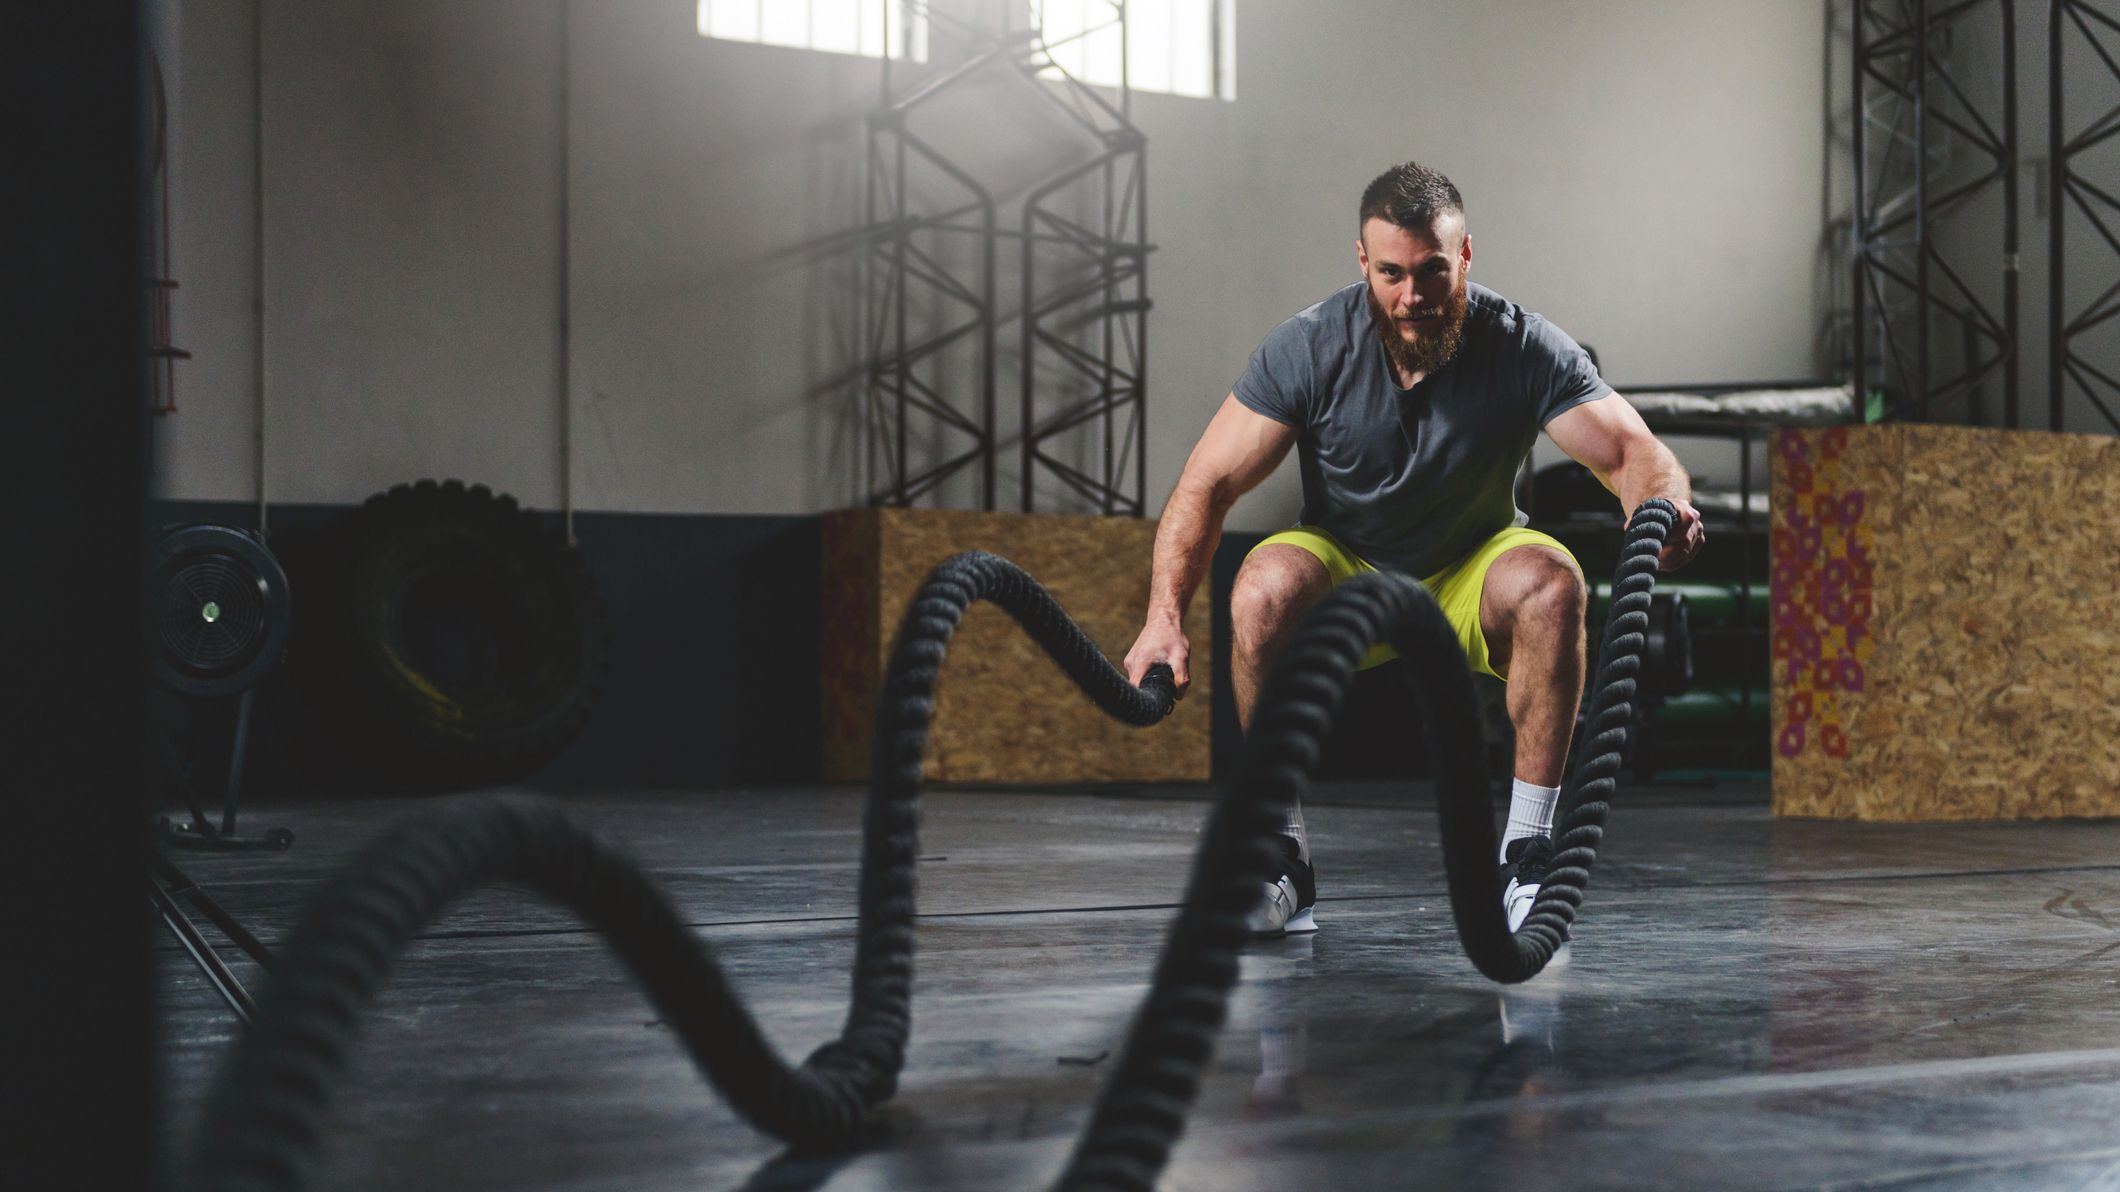 Discover What Muscles Battle Rope Exercises Work